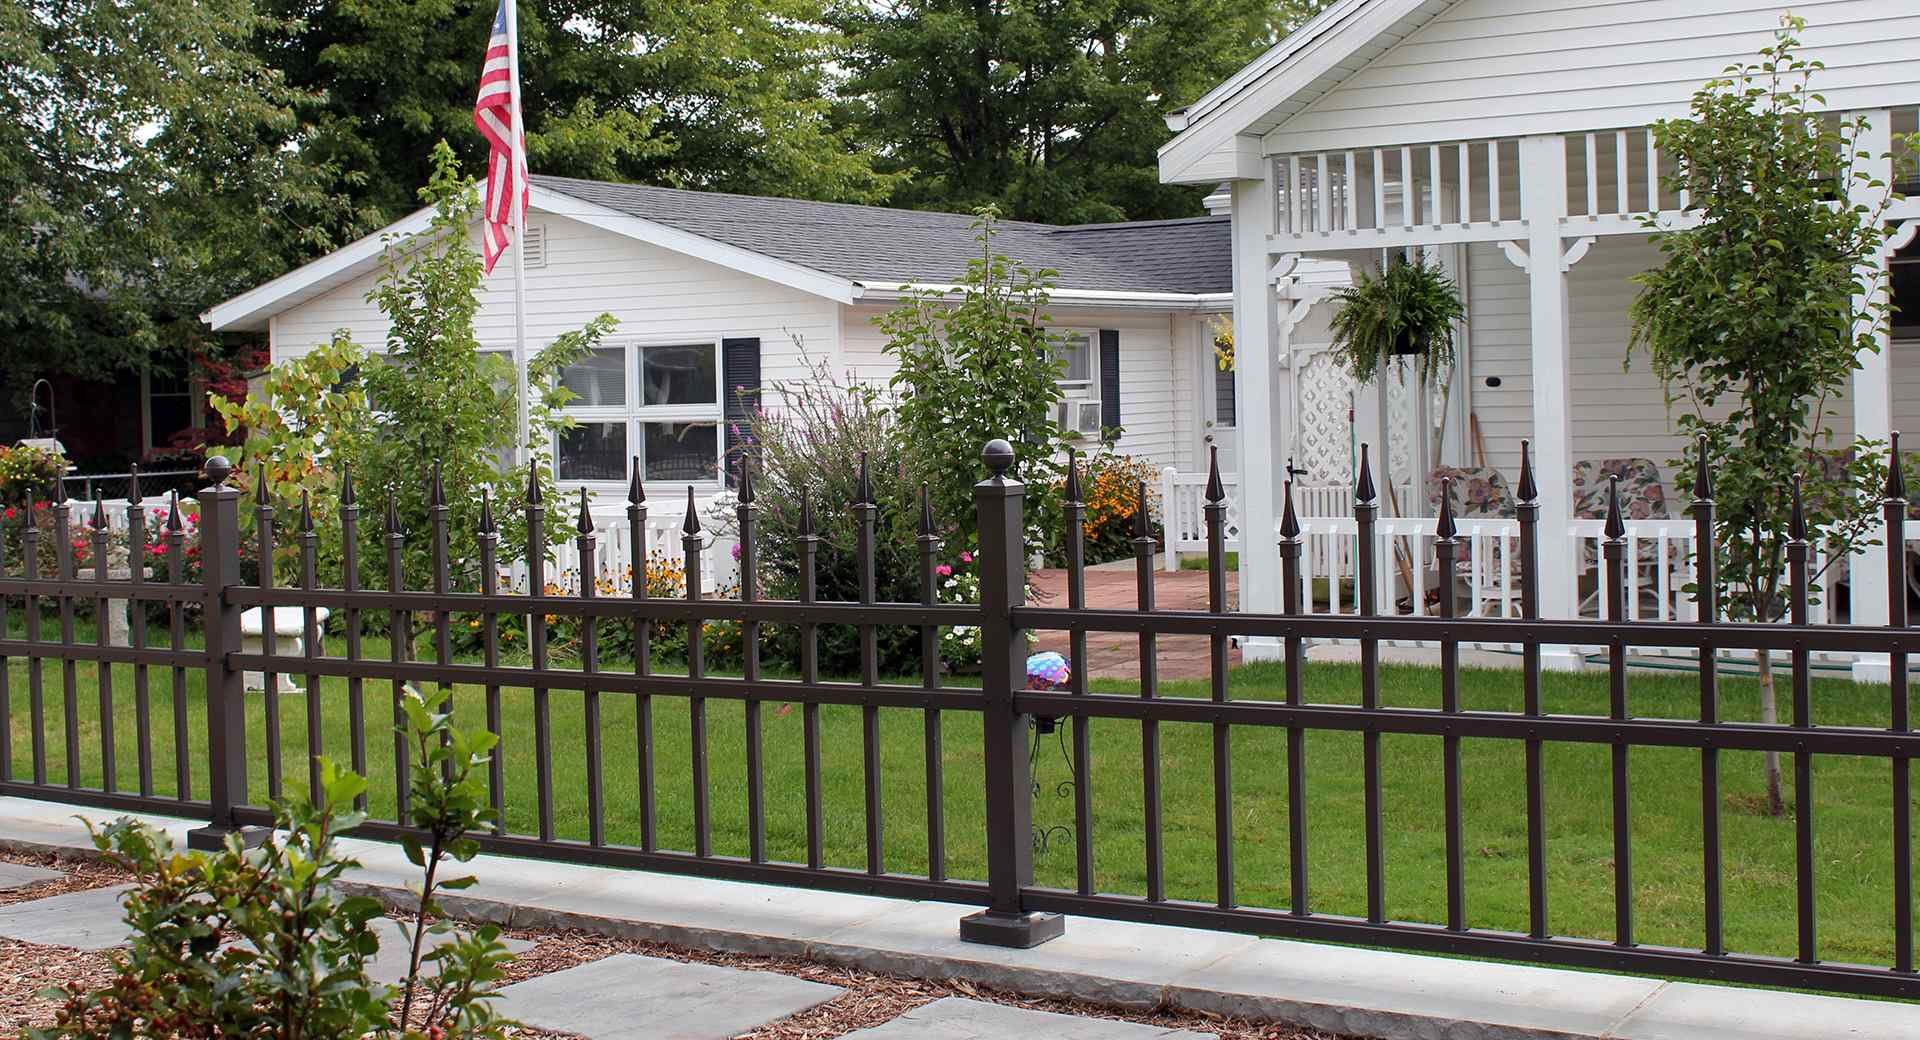 The Dubya Fence Difference in Branchville South Carolina Fence Installations